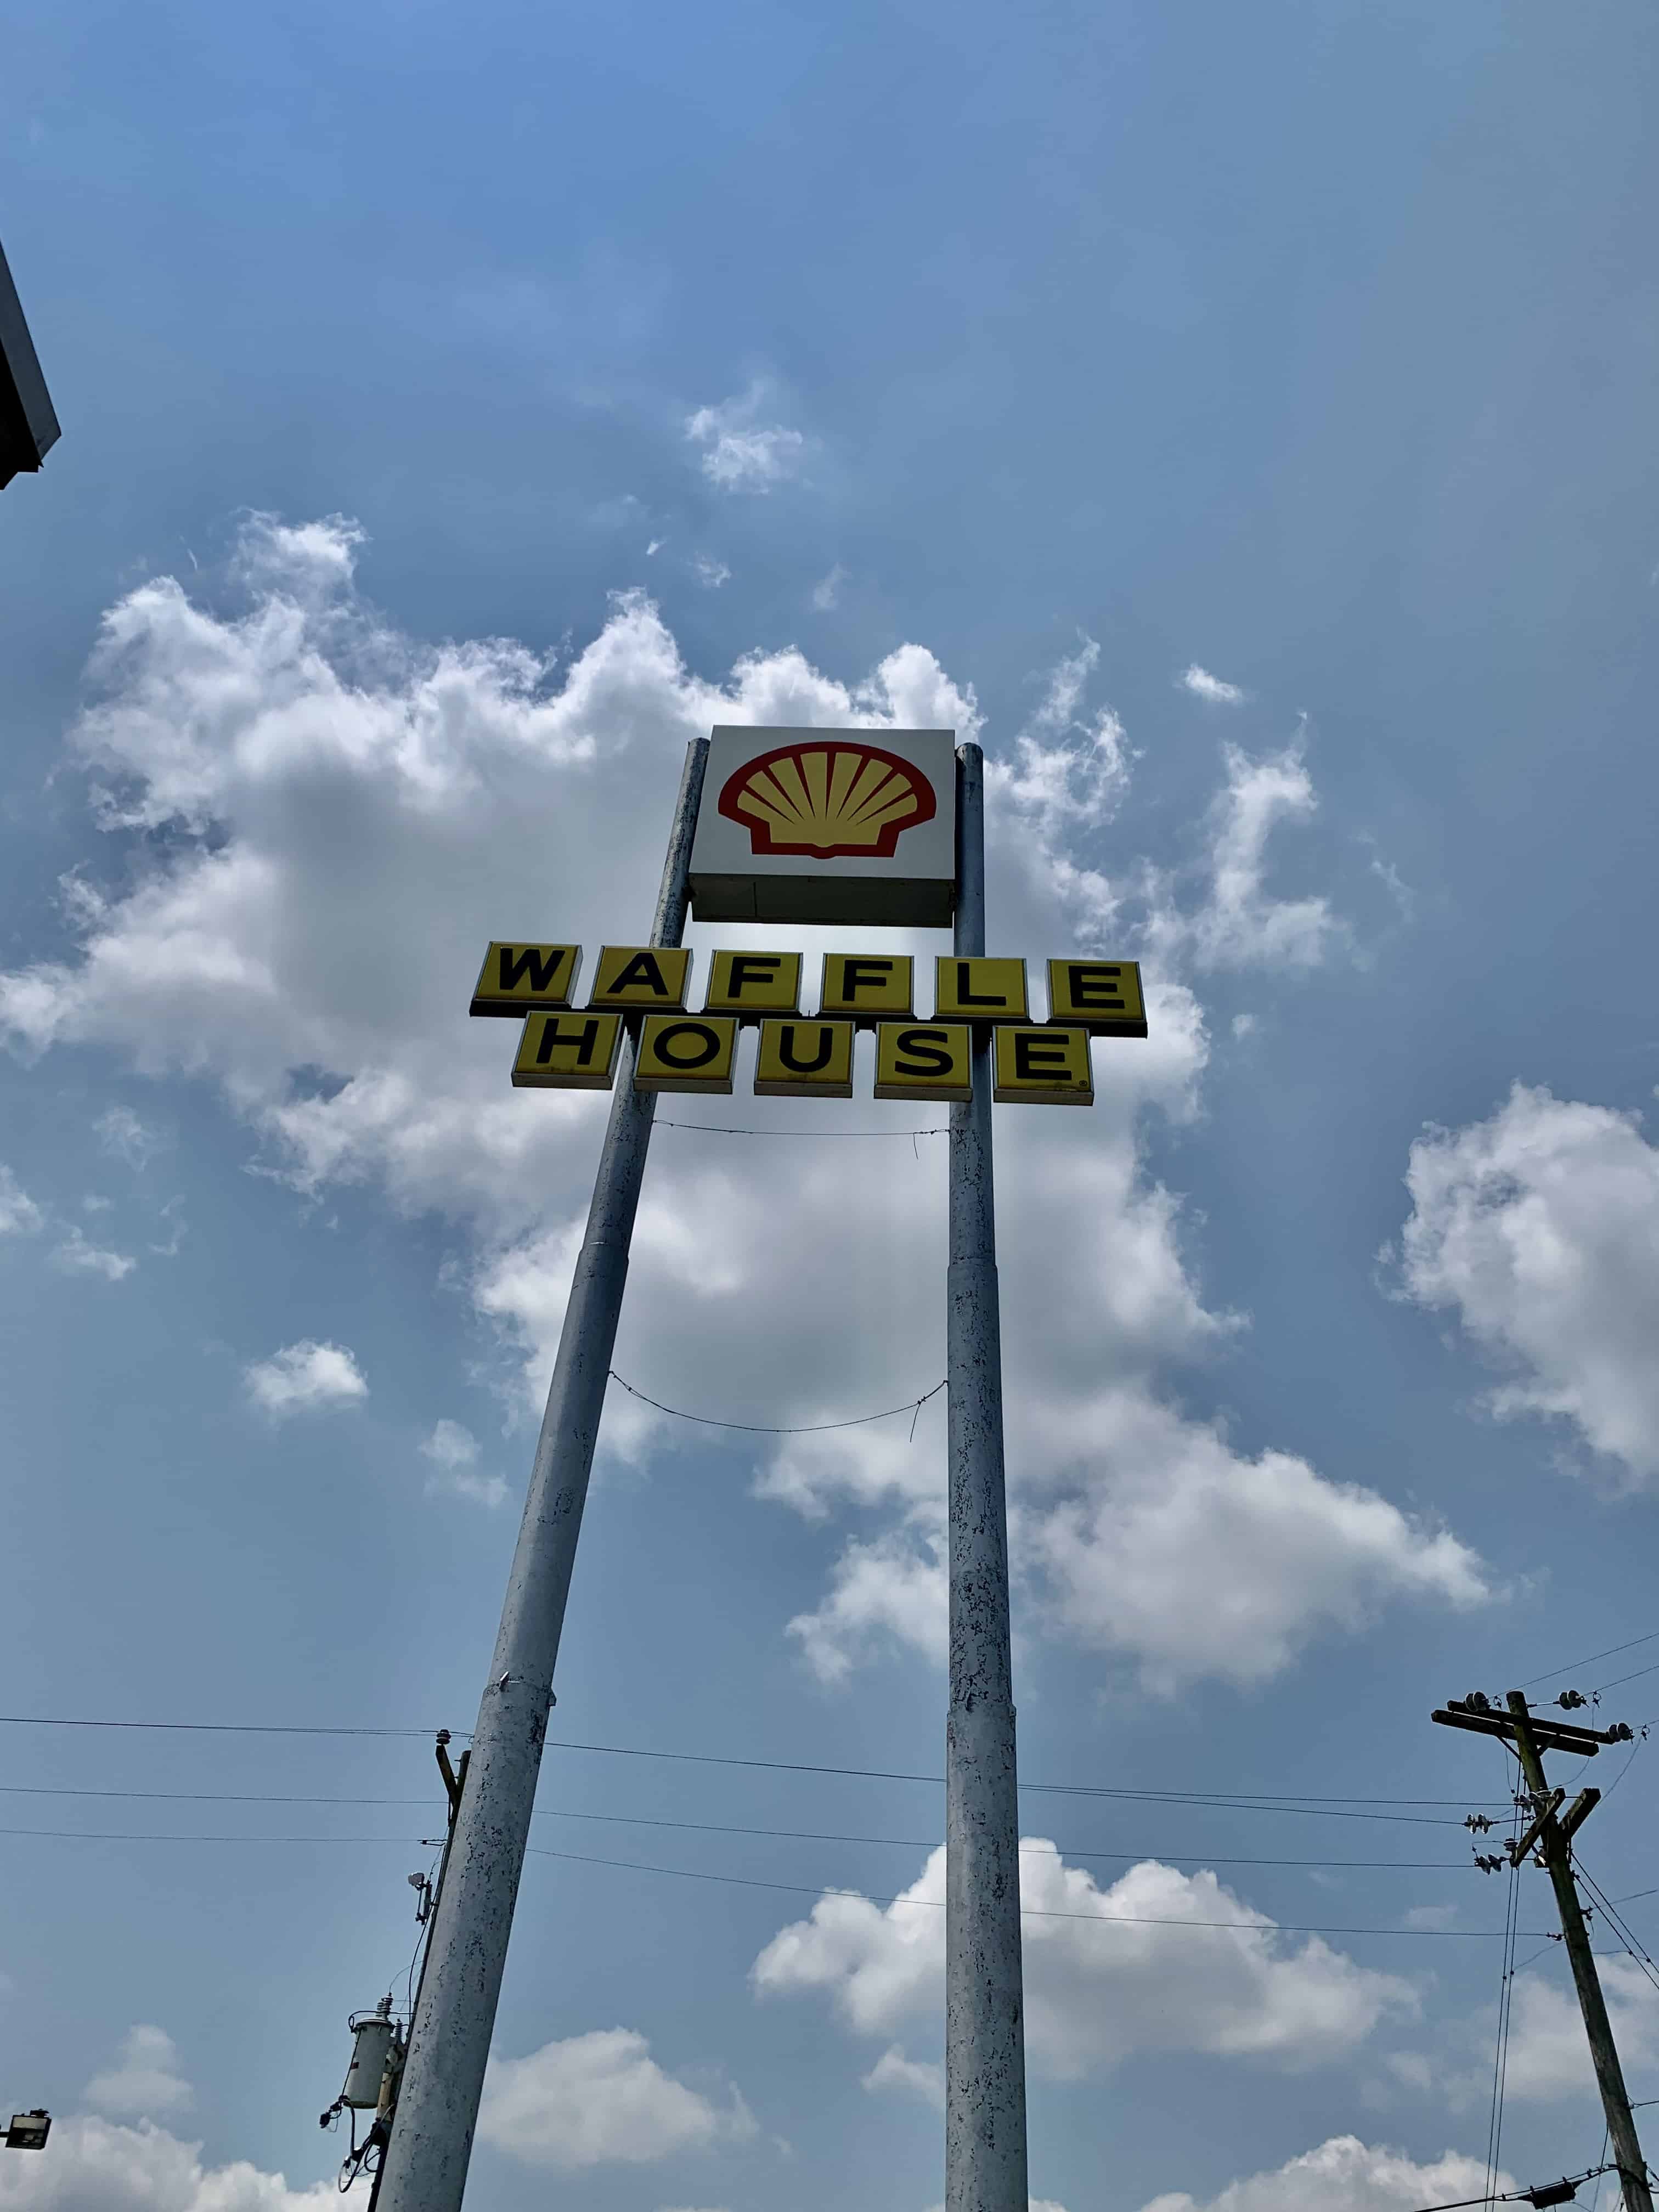 Shell gasoline sign with Waffle House sign below, blue sky background